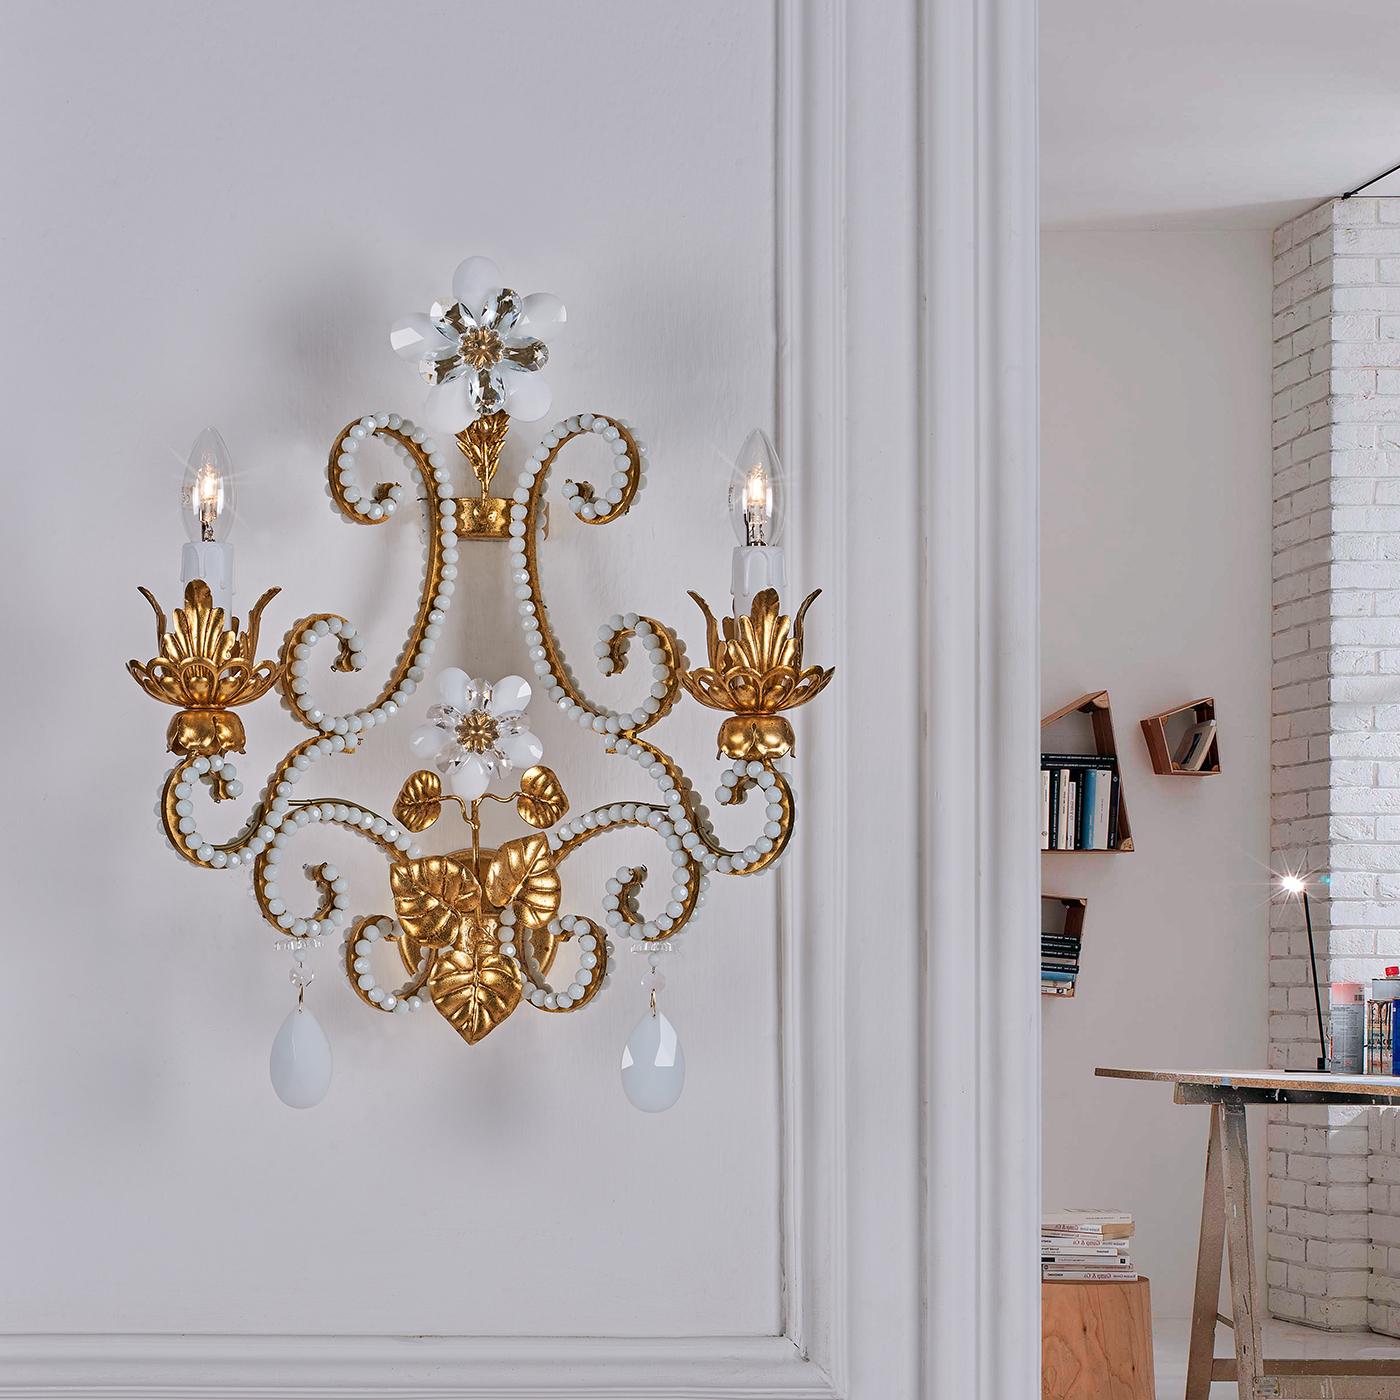 This is a delicate and classy wall lamp characterized by its rich variety of deluxe decorations. It consists of a metal structure decorated with gold leaf coating, rows of white ground beads and white crystal pendants to top it off. It is a